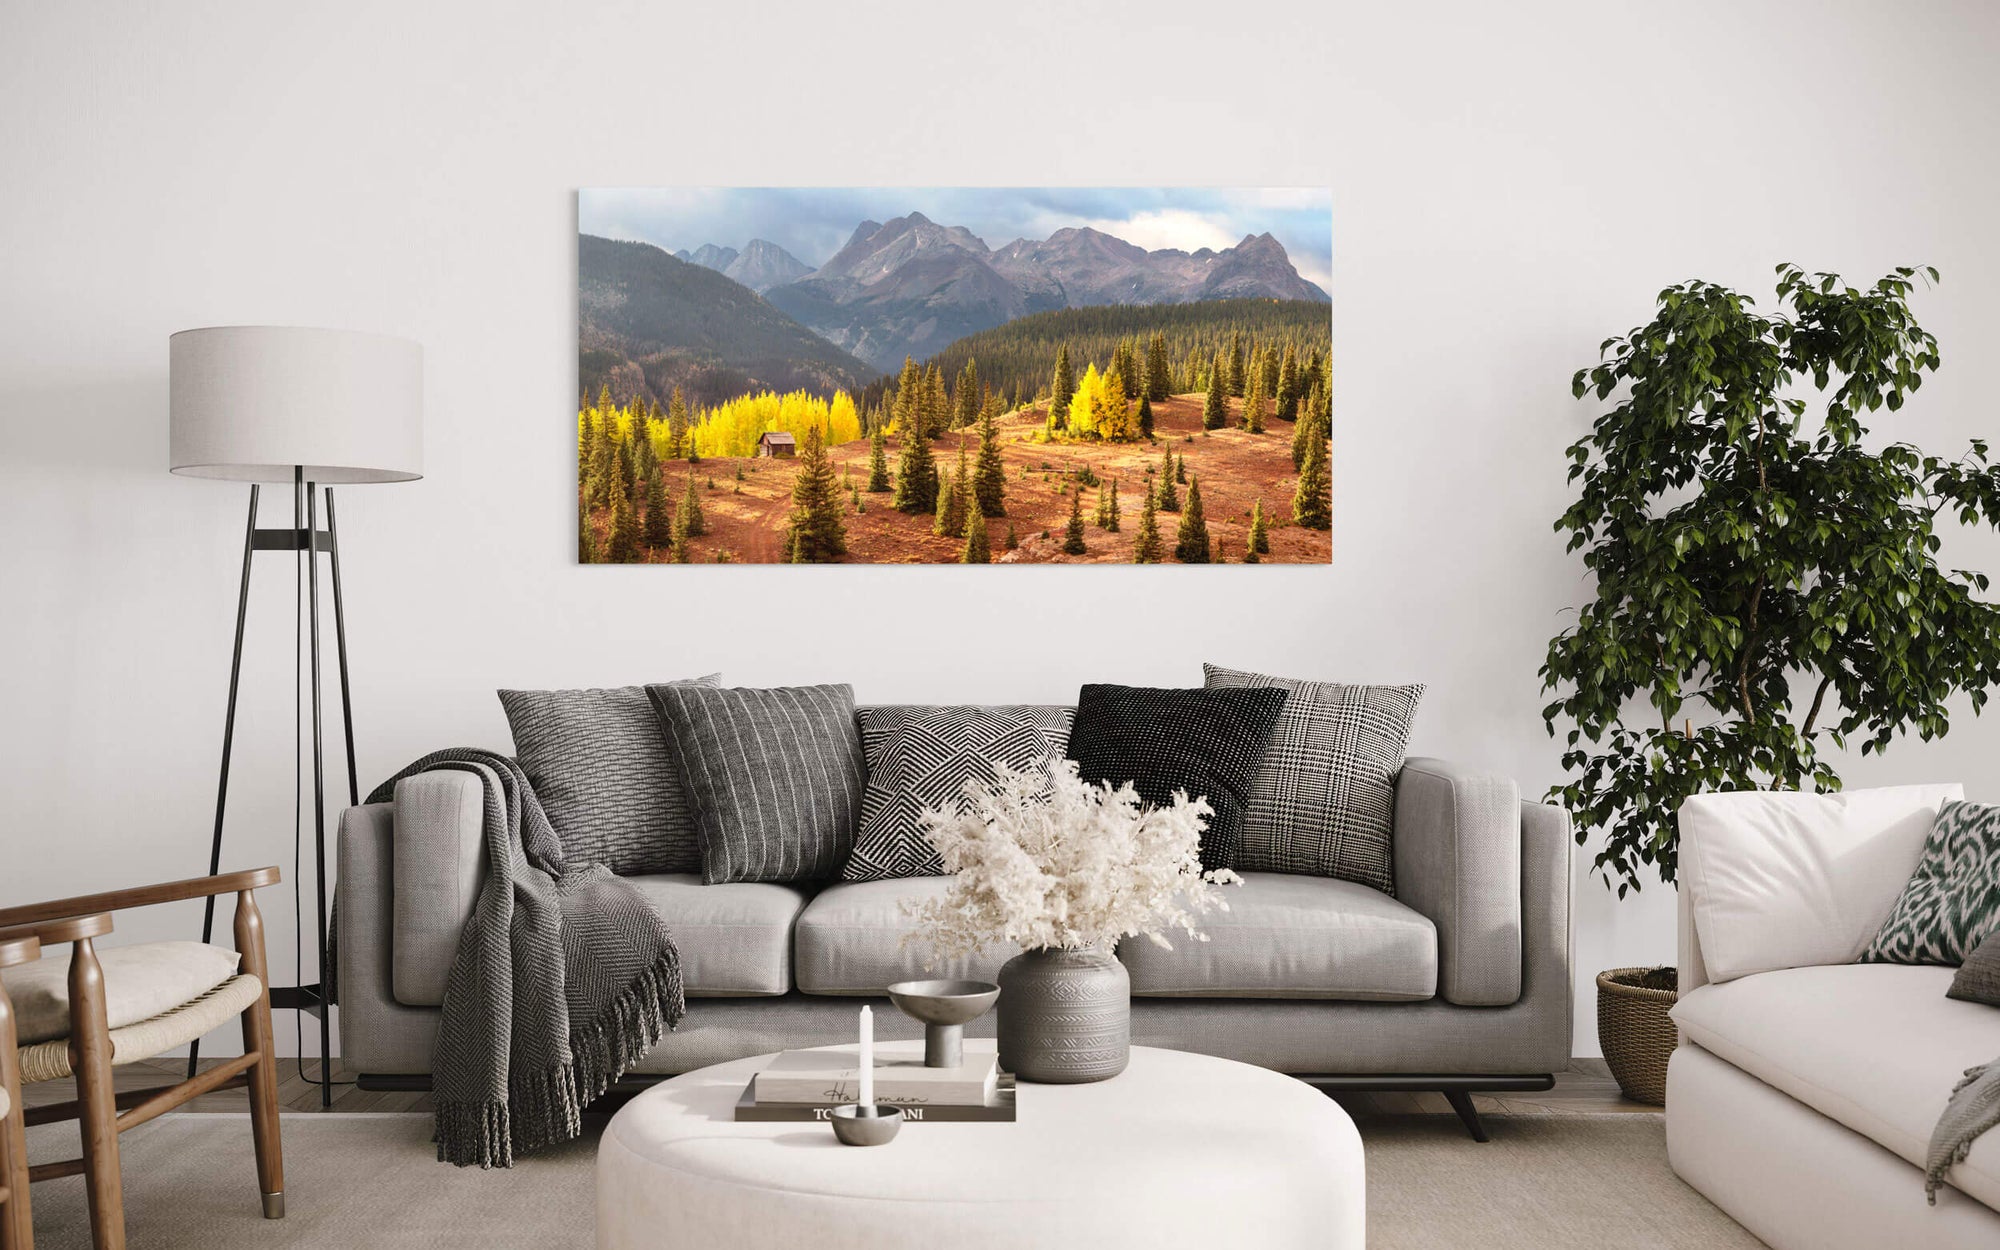 A cabin picture from Molas Pass near Silverton during peak Colorado fall hangs in a living room.